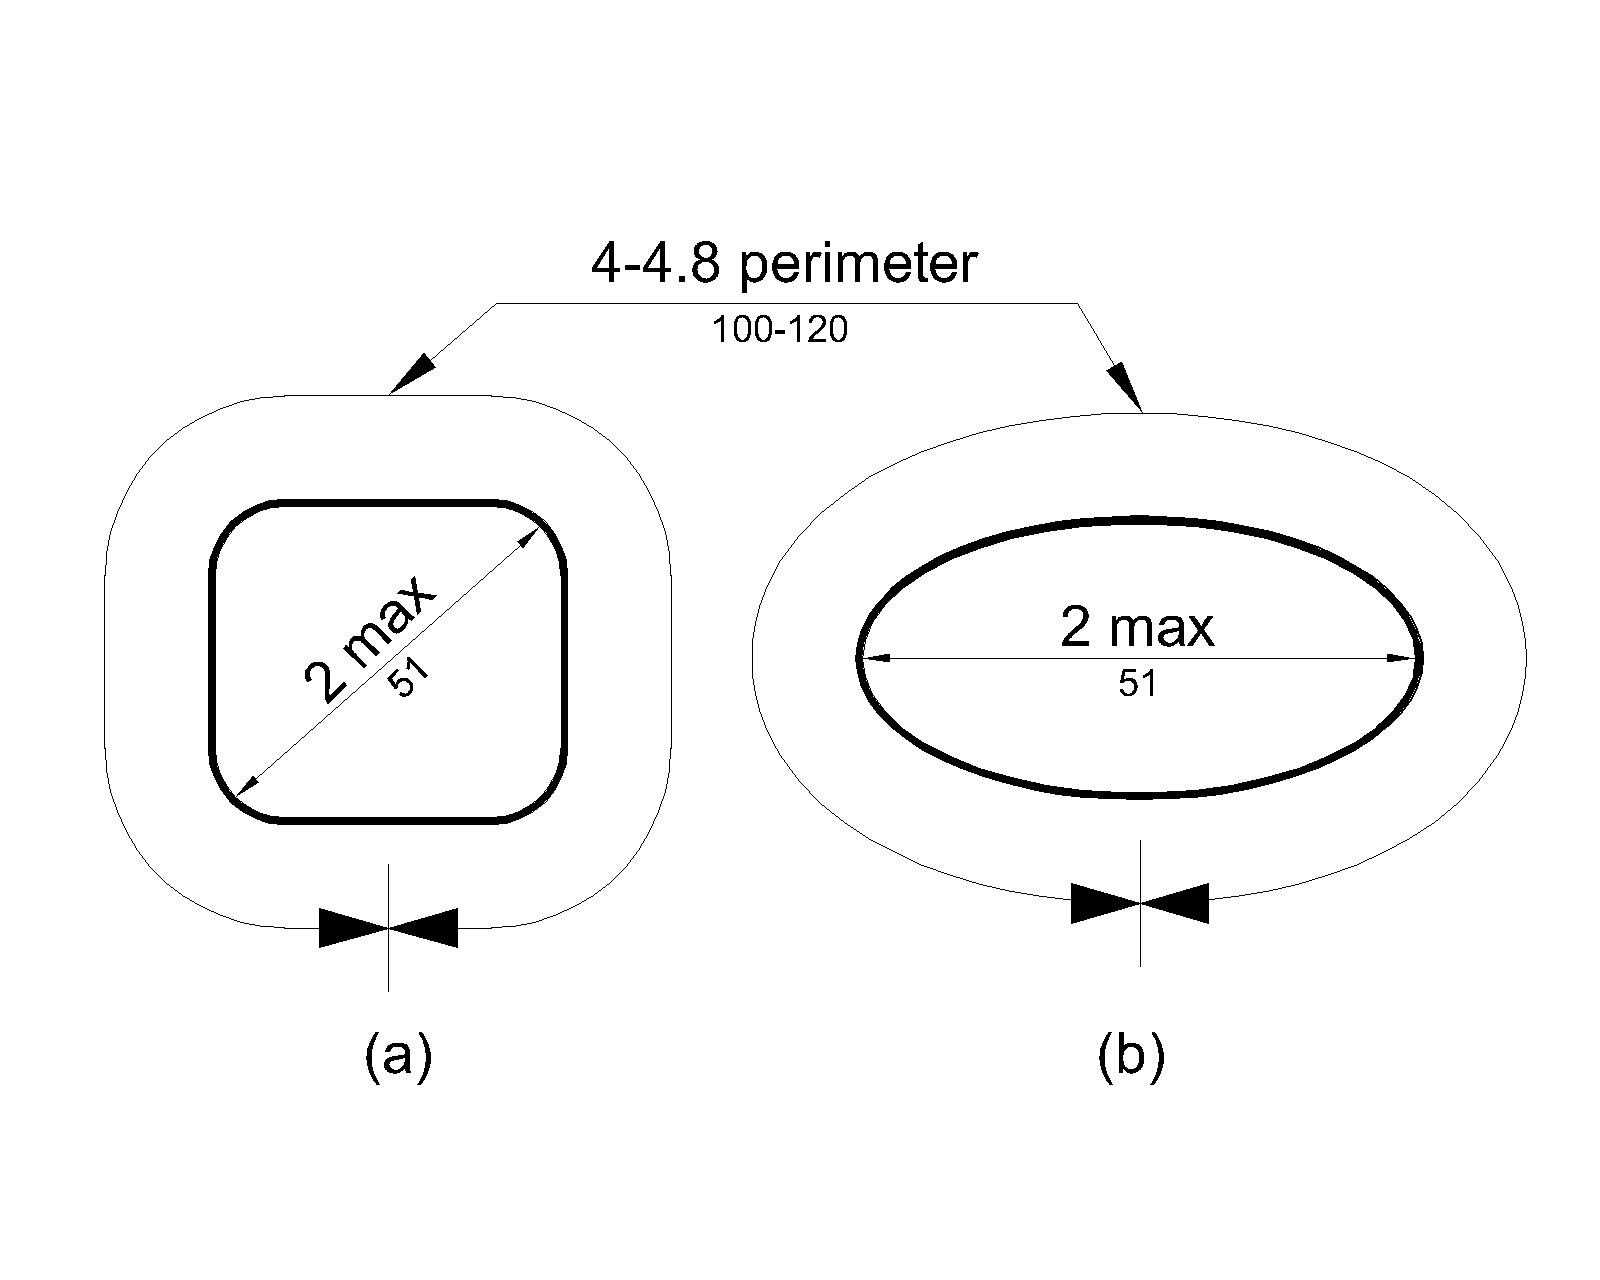 Figure (a) shows a handrail with an approximately square cross section and figure (b) shows an elliptical cross section. The largest cross section dimension is 2 inches (51 mm) maximum. The perimeter dimension must be 4 to 4.8 inches (100 to 120 mm).